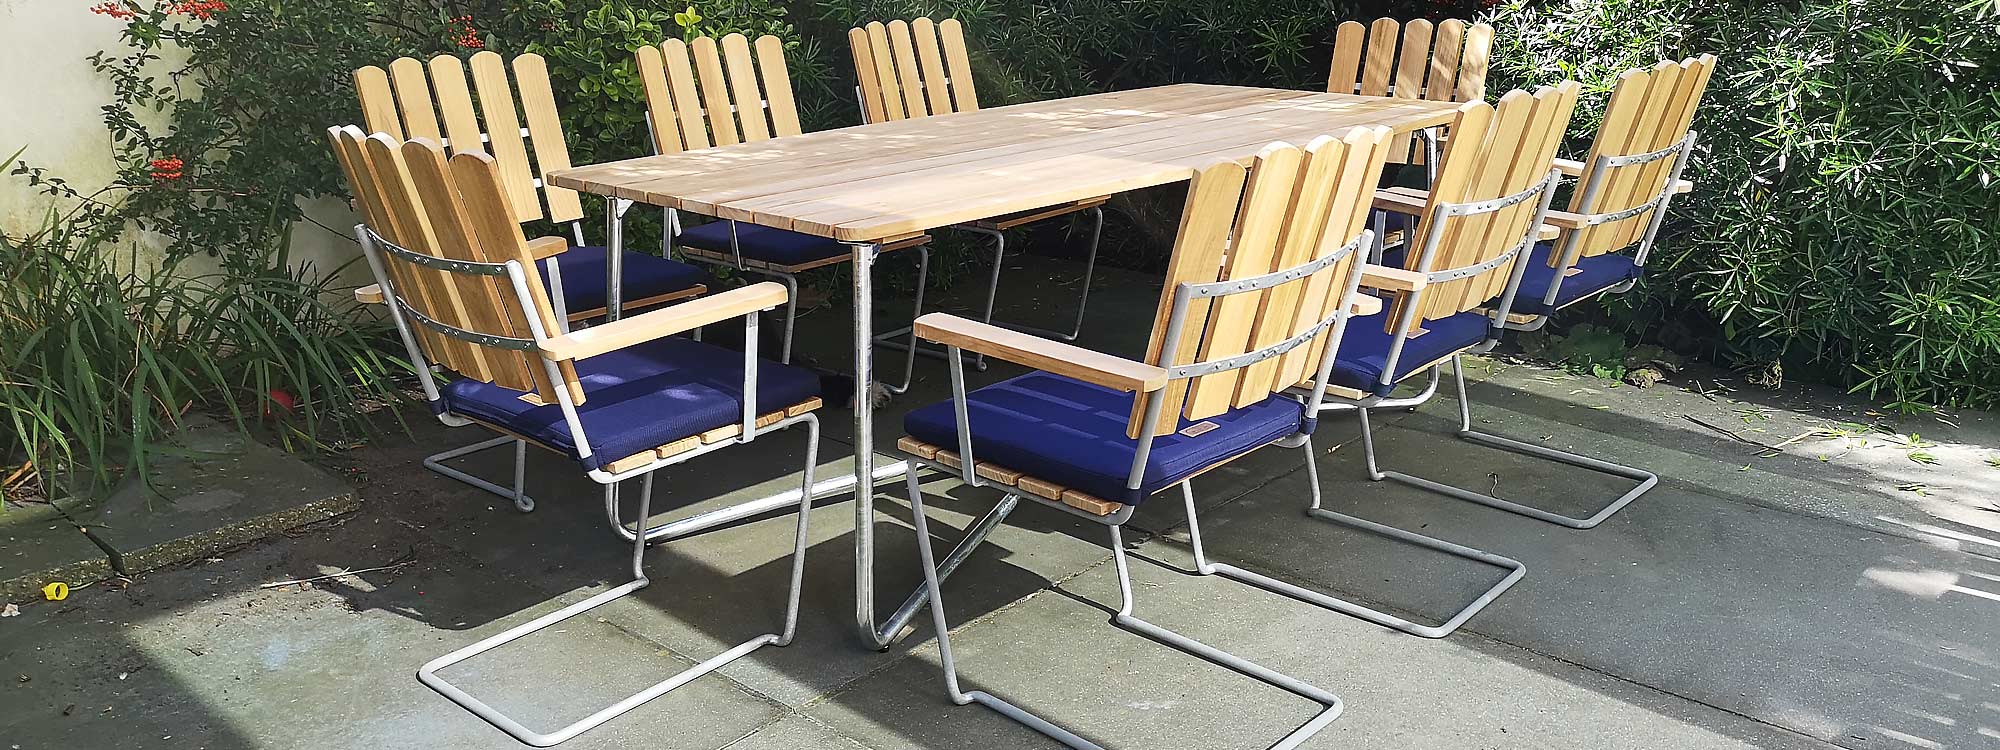 Image of London installation Of Grythyttan Swedish Garden Furniture including A2 Cantilever Garden Chair & B30 190 Table In galvanised steel and FSC certified teak